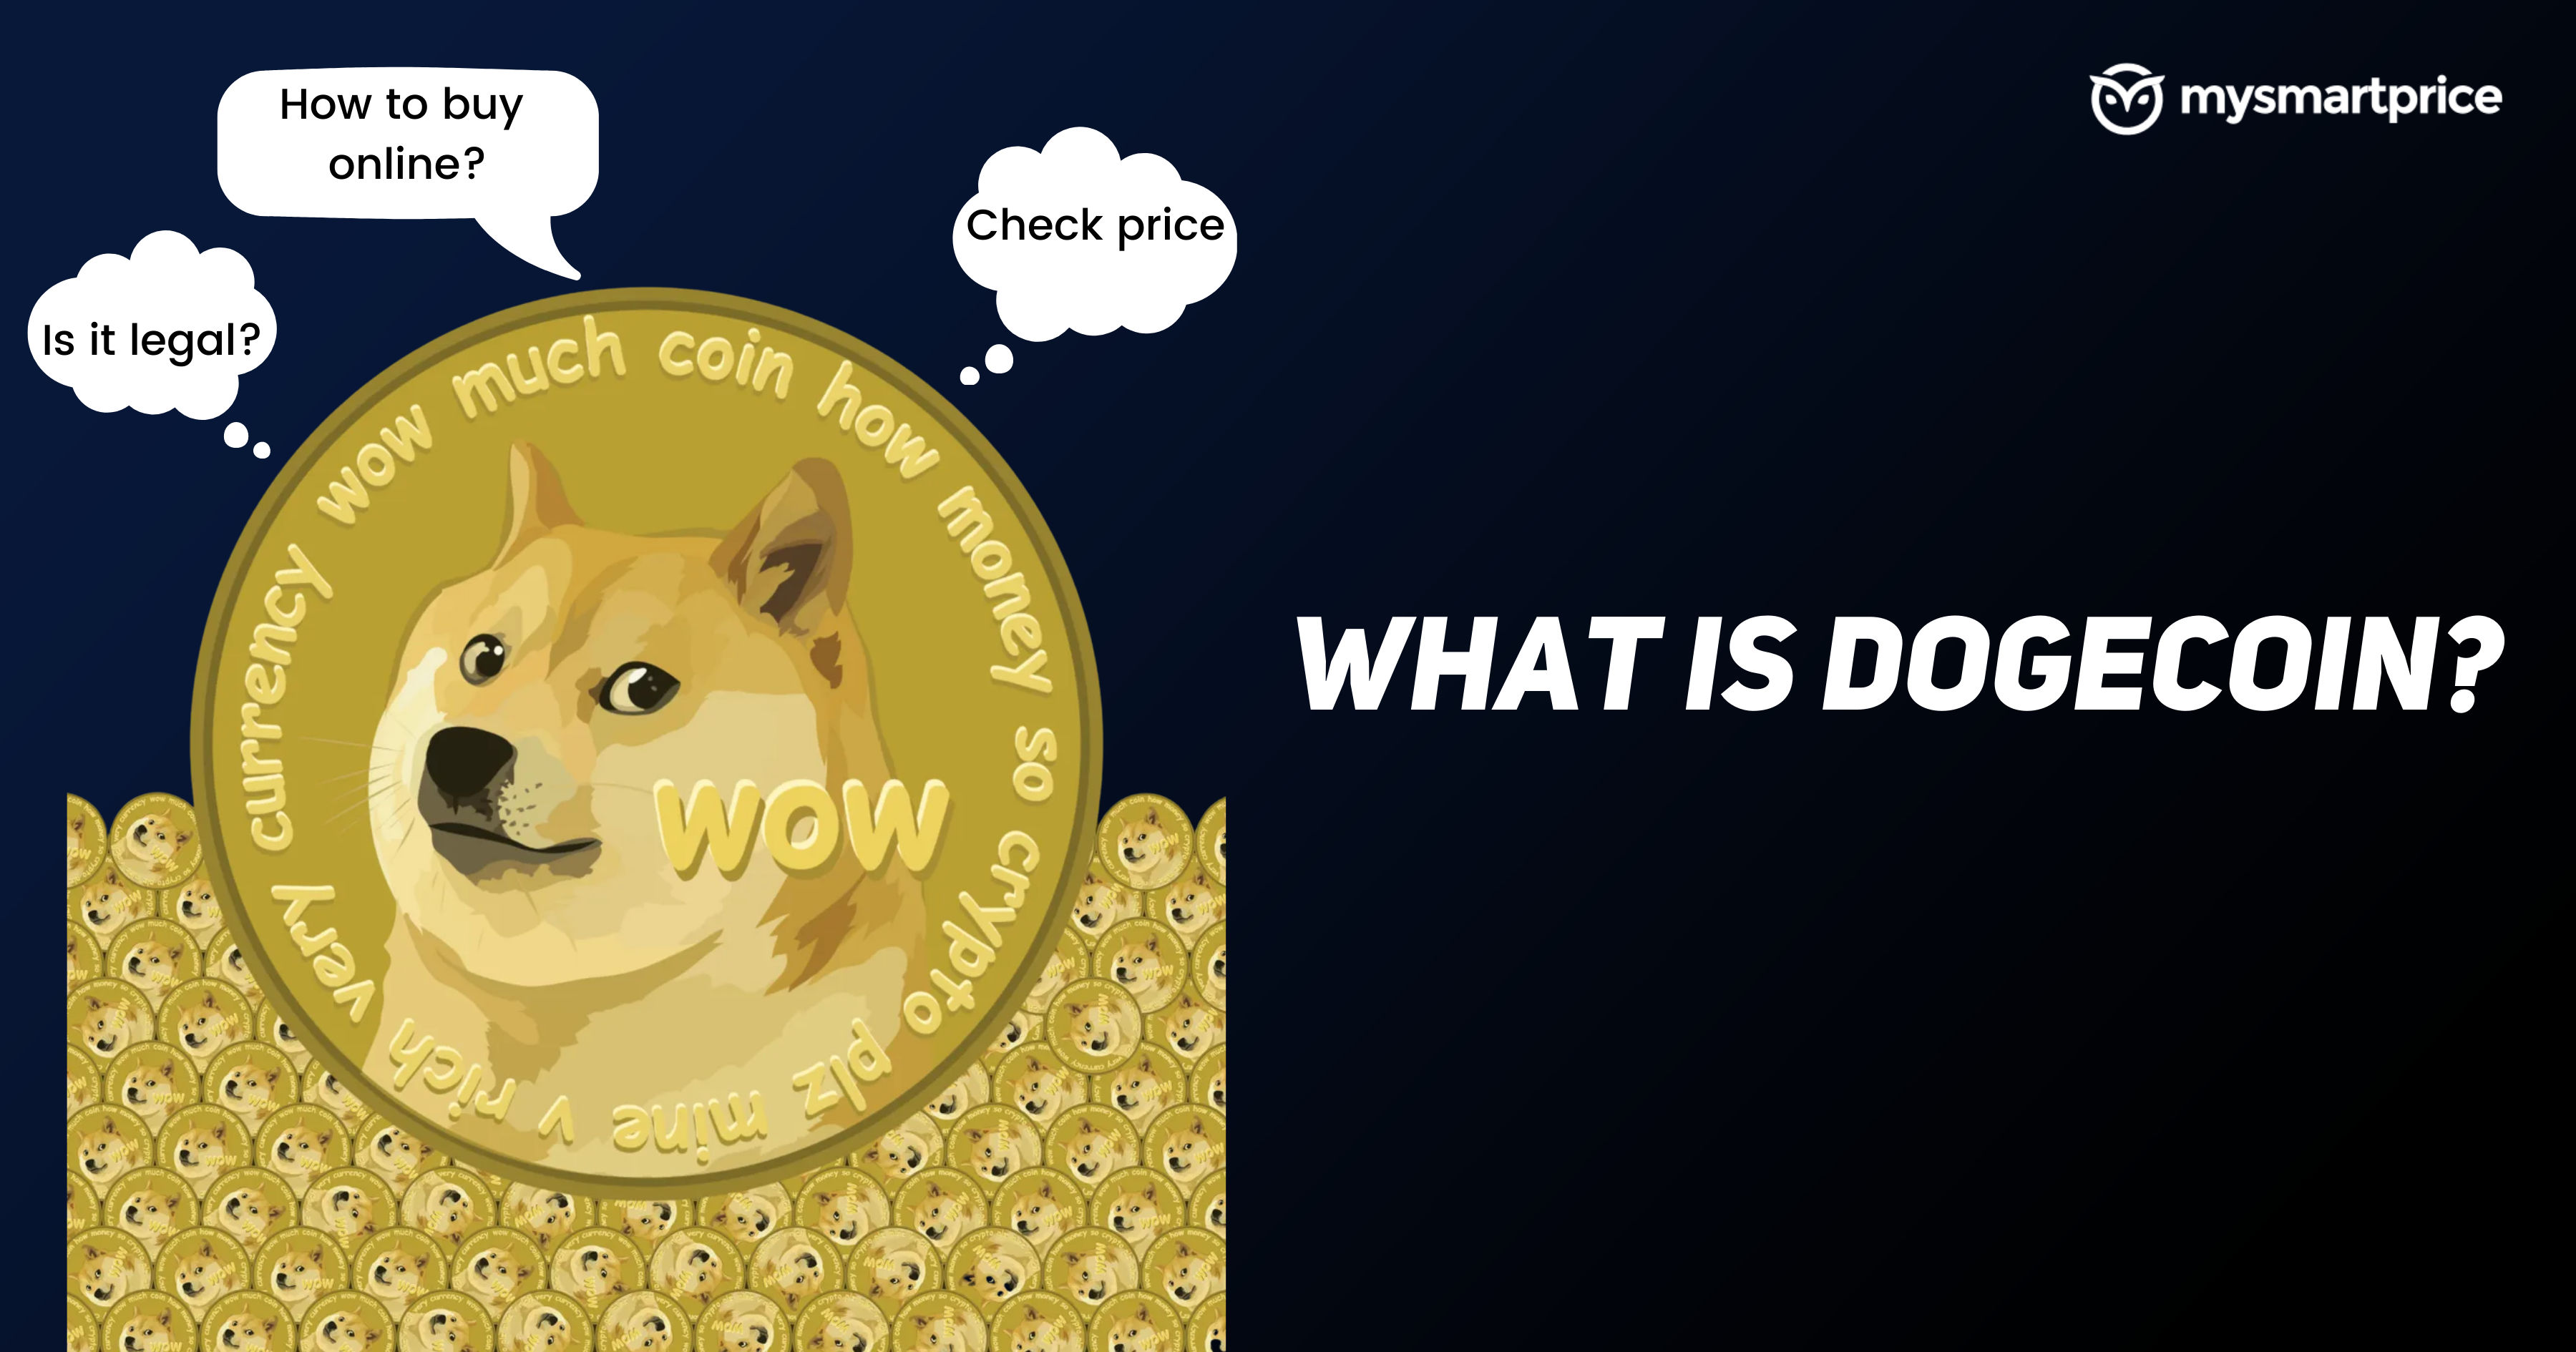 how to buy goldcoin cryptocurrency